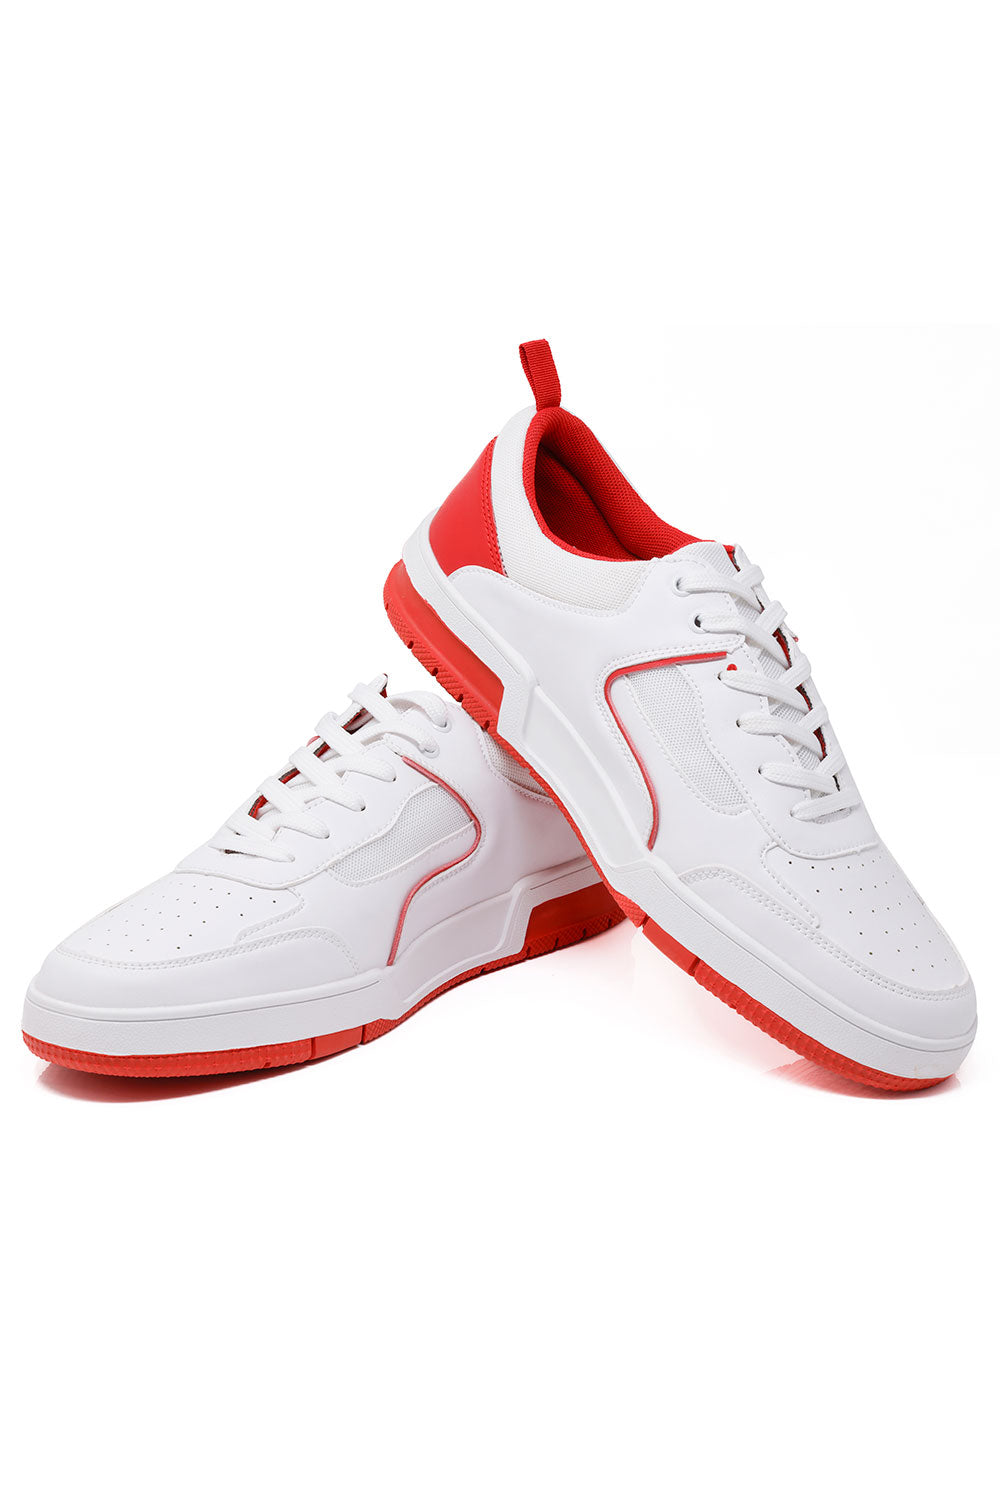 Barabas Men's Low Top Laced-Up Premium PU Leather Sneakers 4SK10 White Red